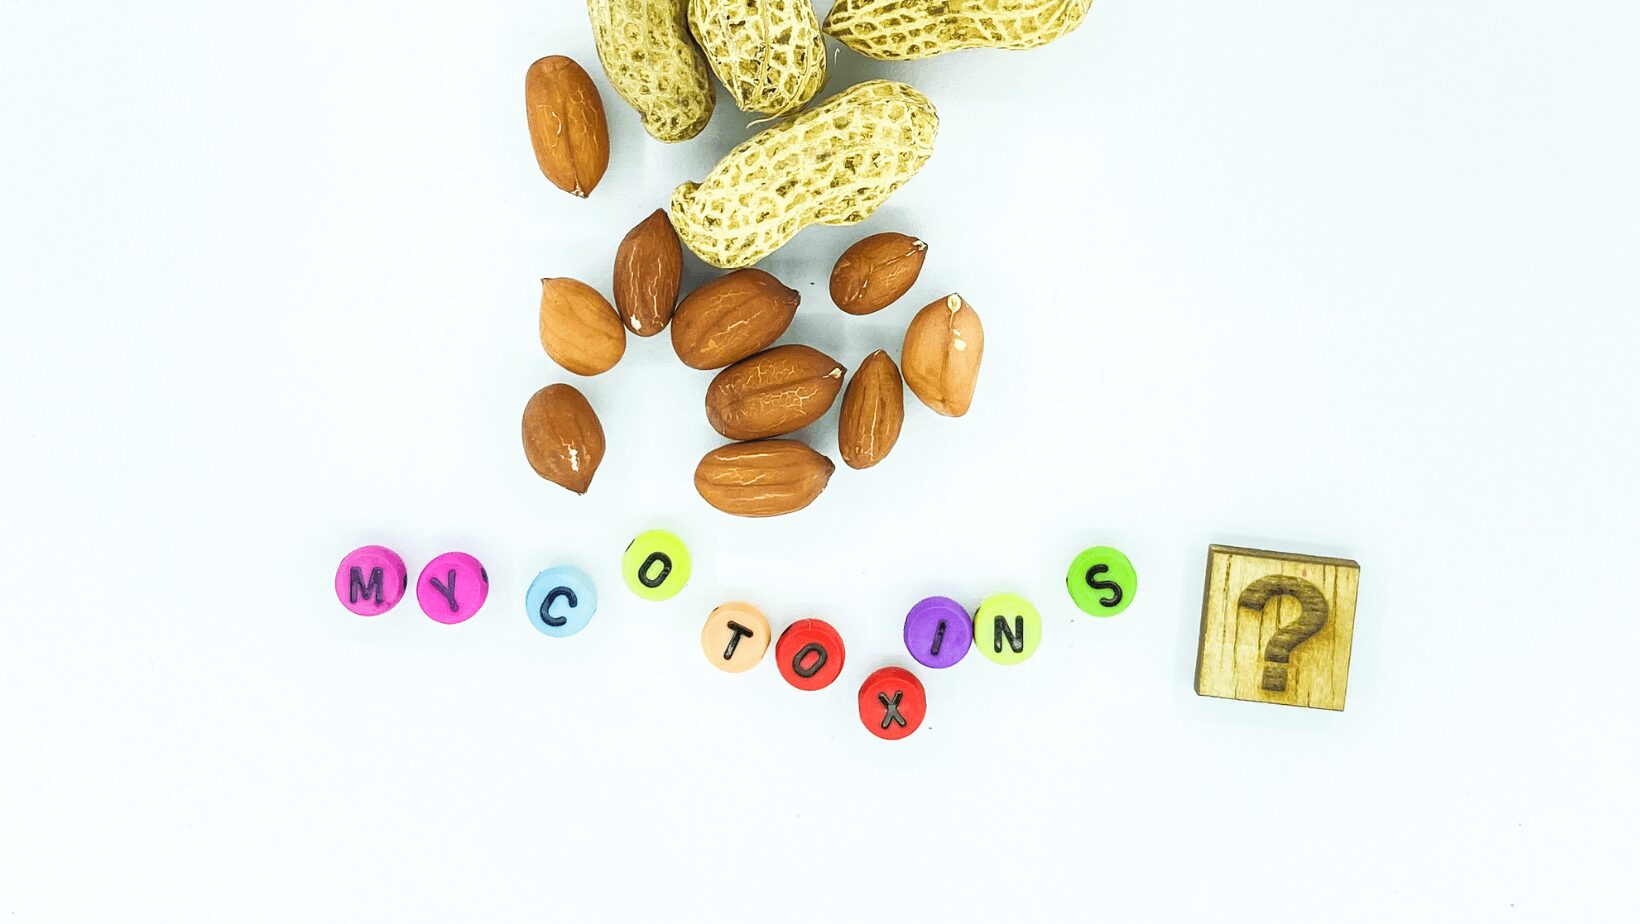 nuts on a background underneath beads forming the word mycotoxins with a question mark